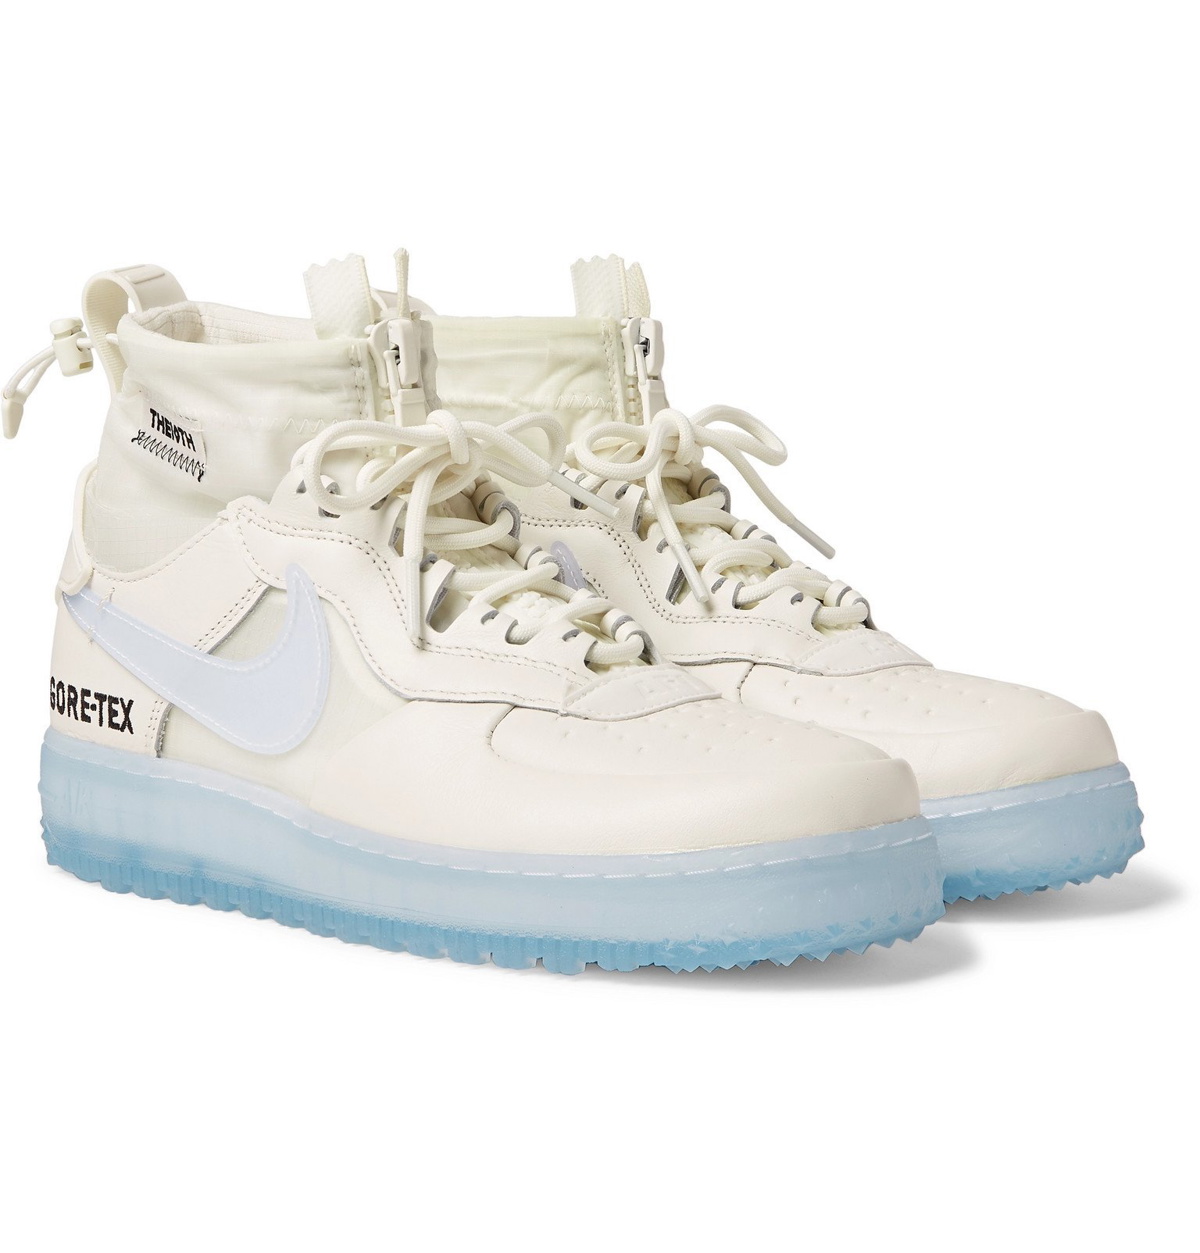 Investigación Rodeo Fuera de plazo Nike - Air Force 1 Winter GORE-TEX and Leather High-Top Sneakers - White  Nike